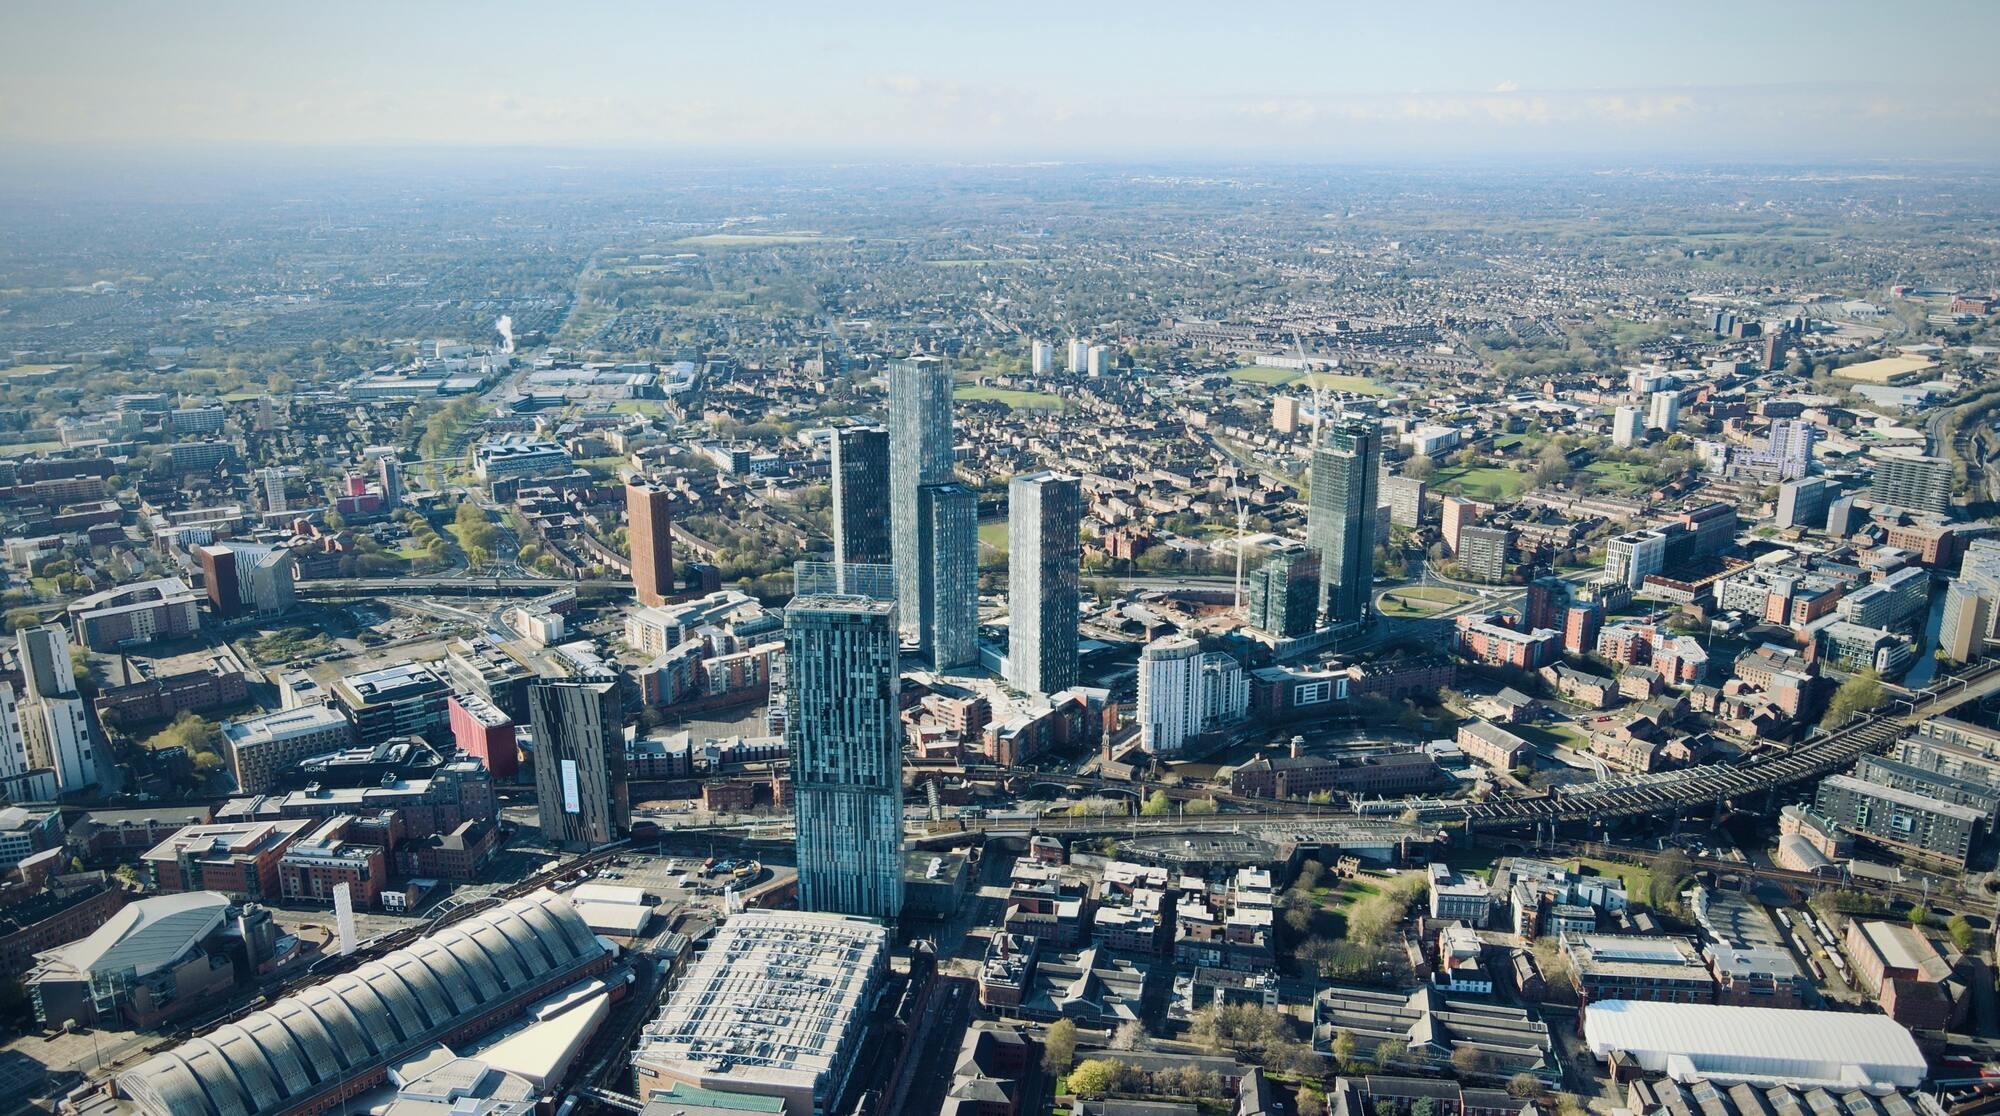 Large-scale development in Manchester: new homes will appear on the outskirts of the city center